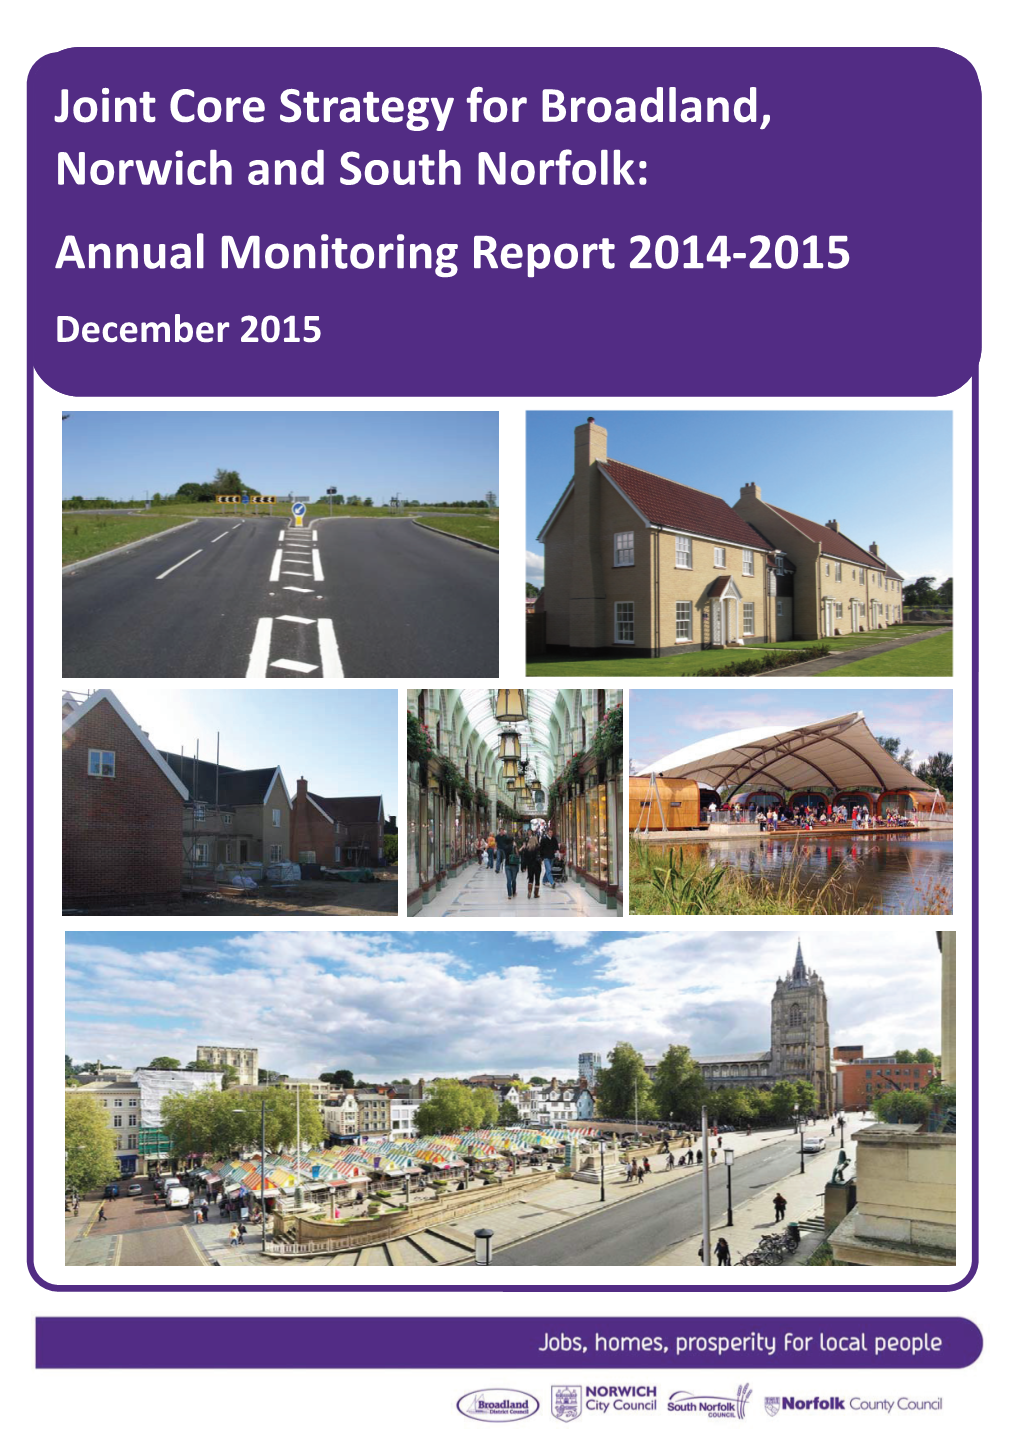 Annual Monitoring Report 2014-15